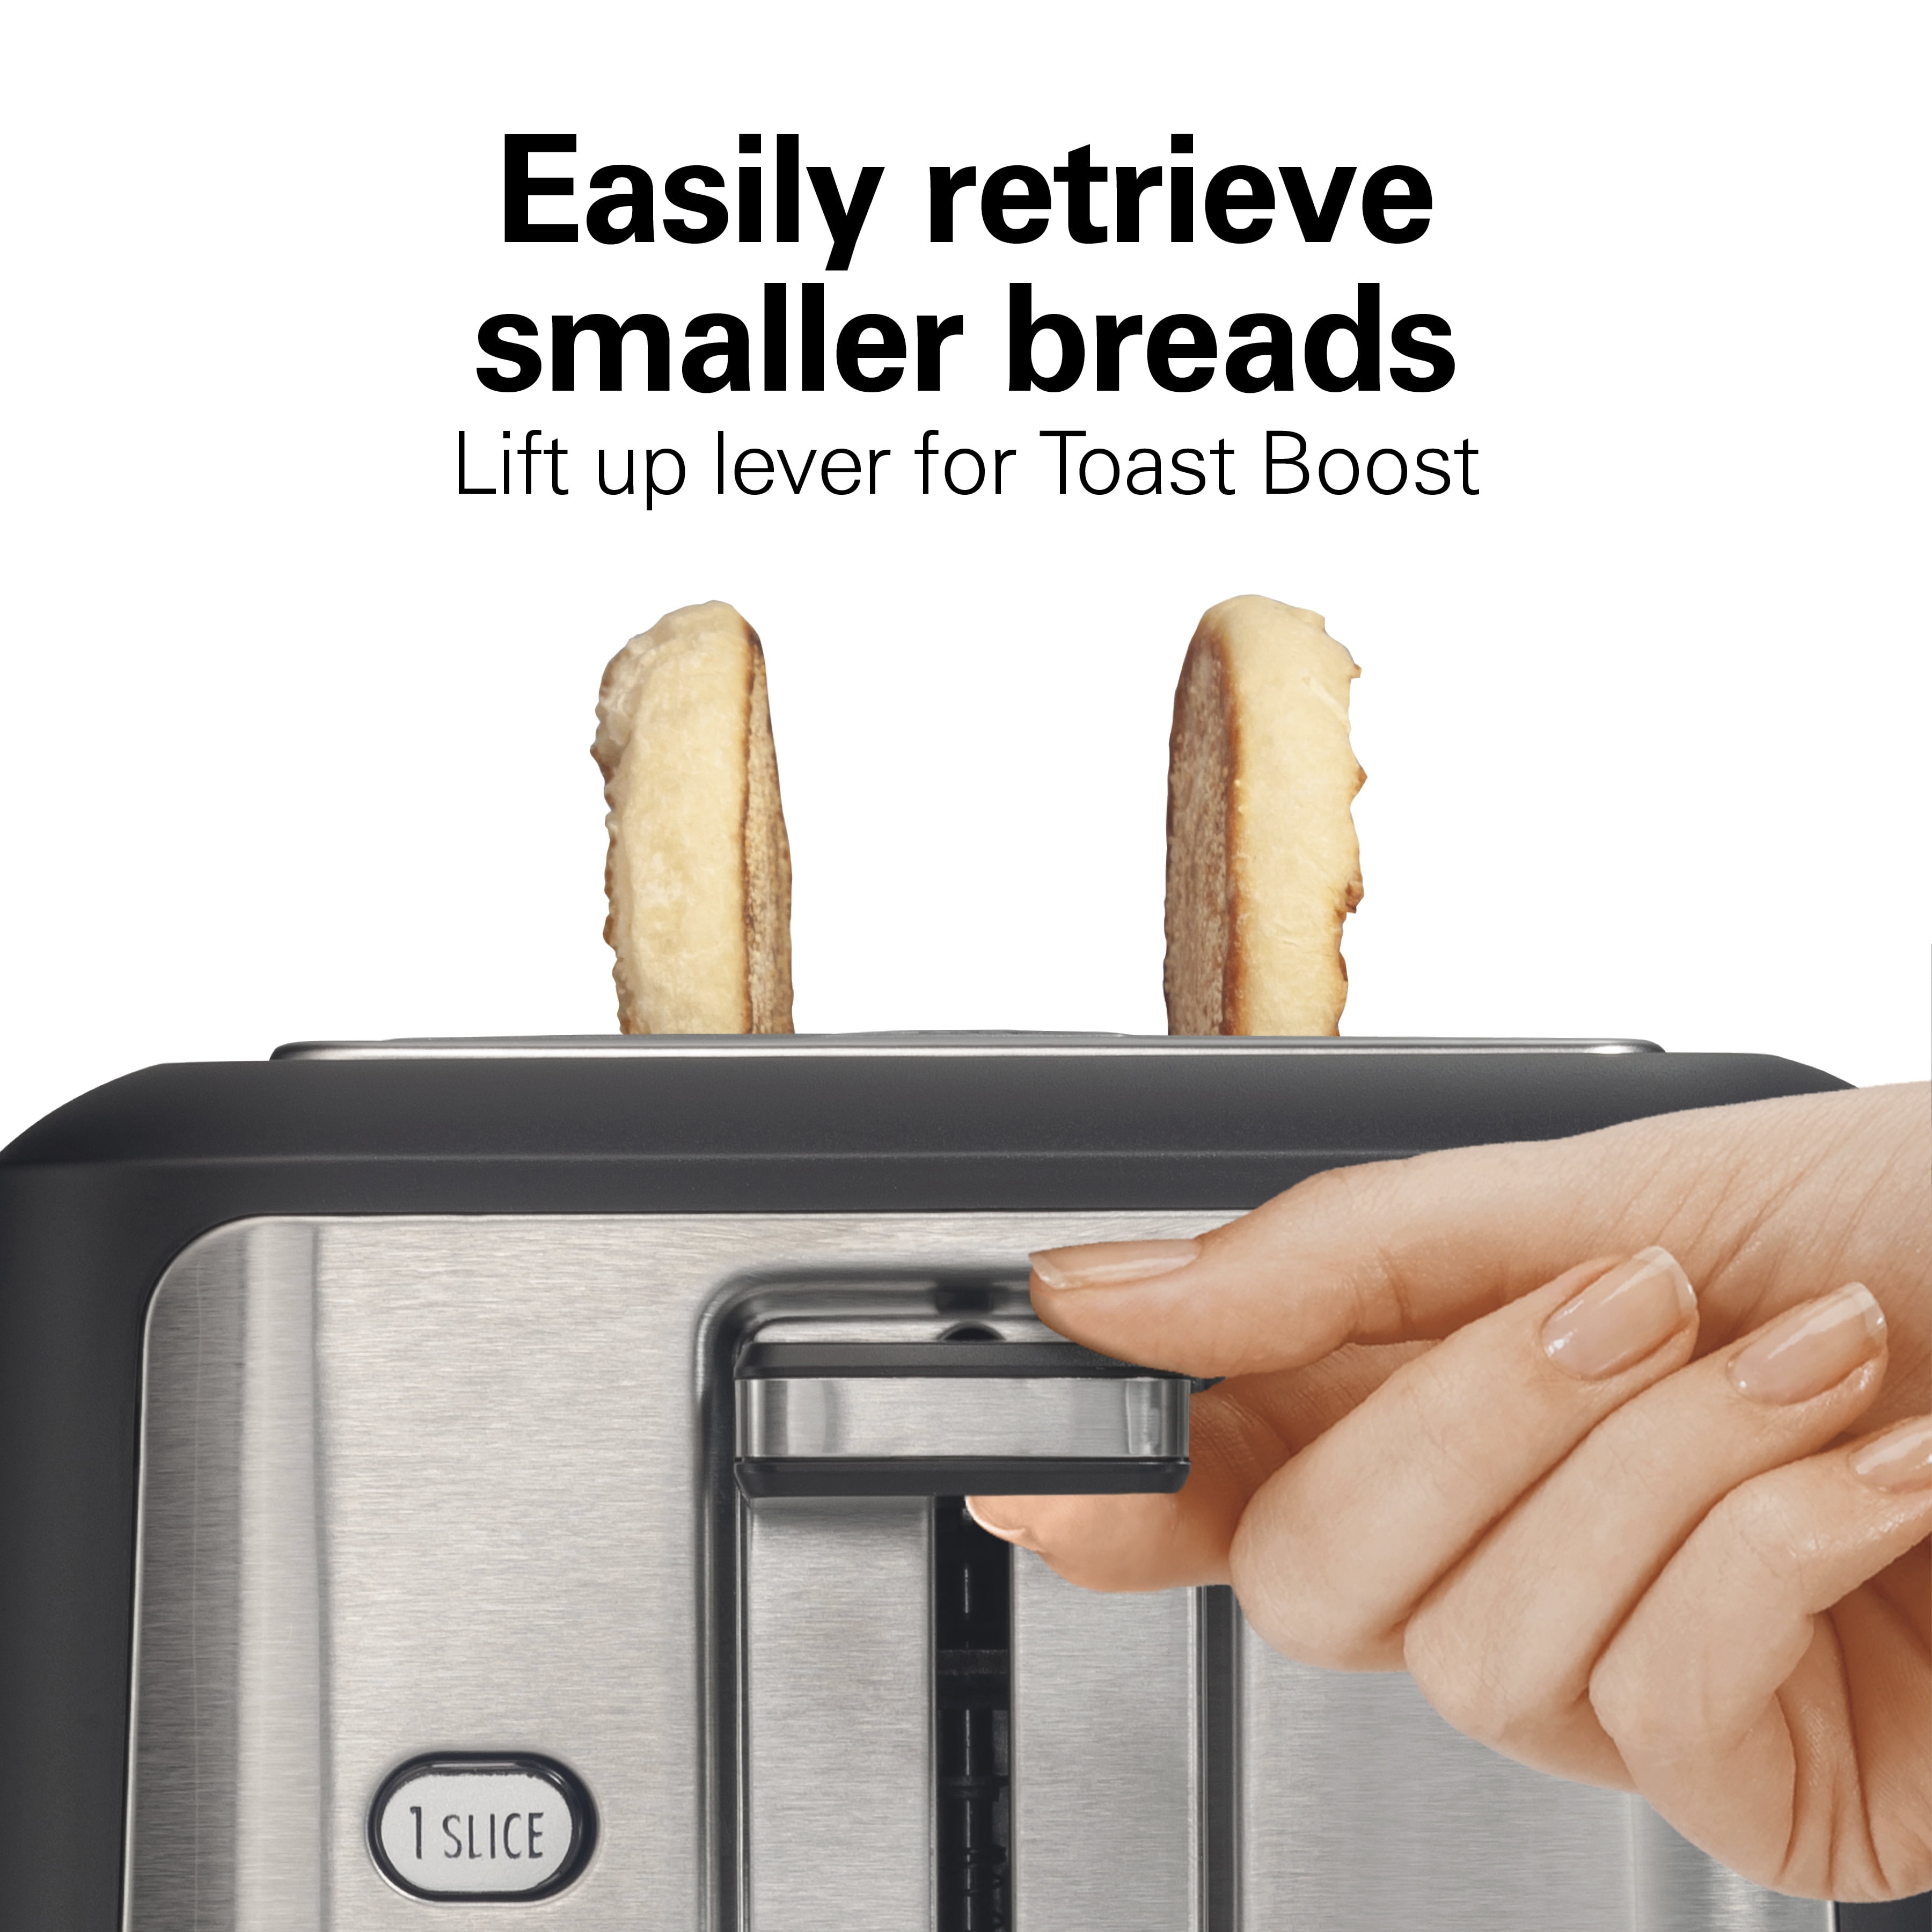 How Dualit set the standards for perfectly toasted bread, The Independent